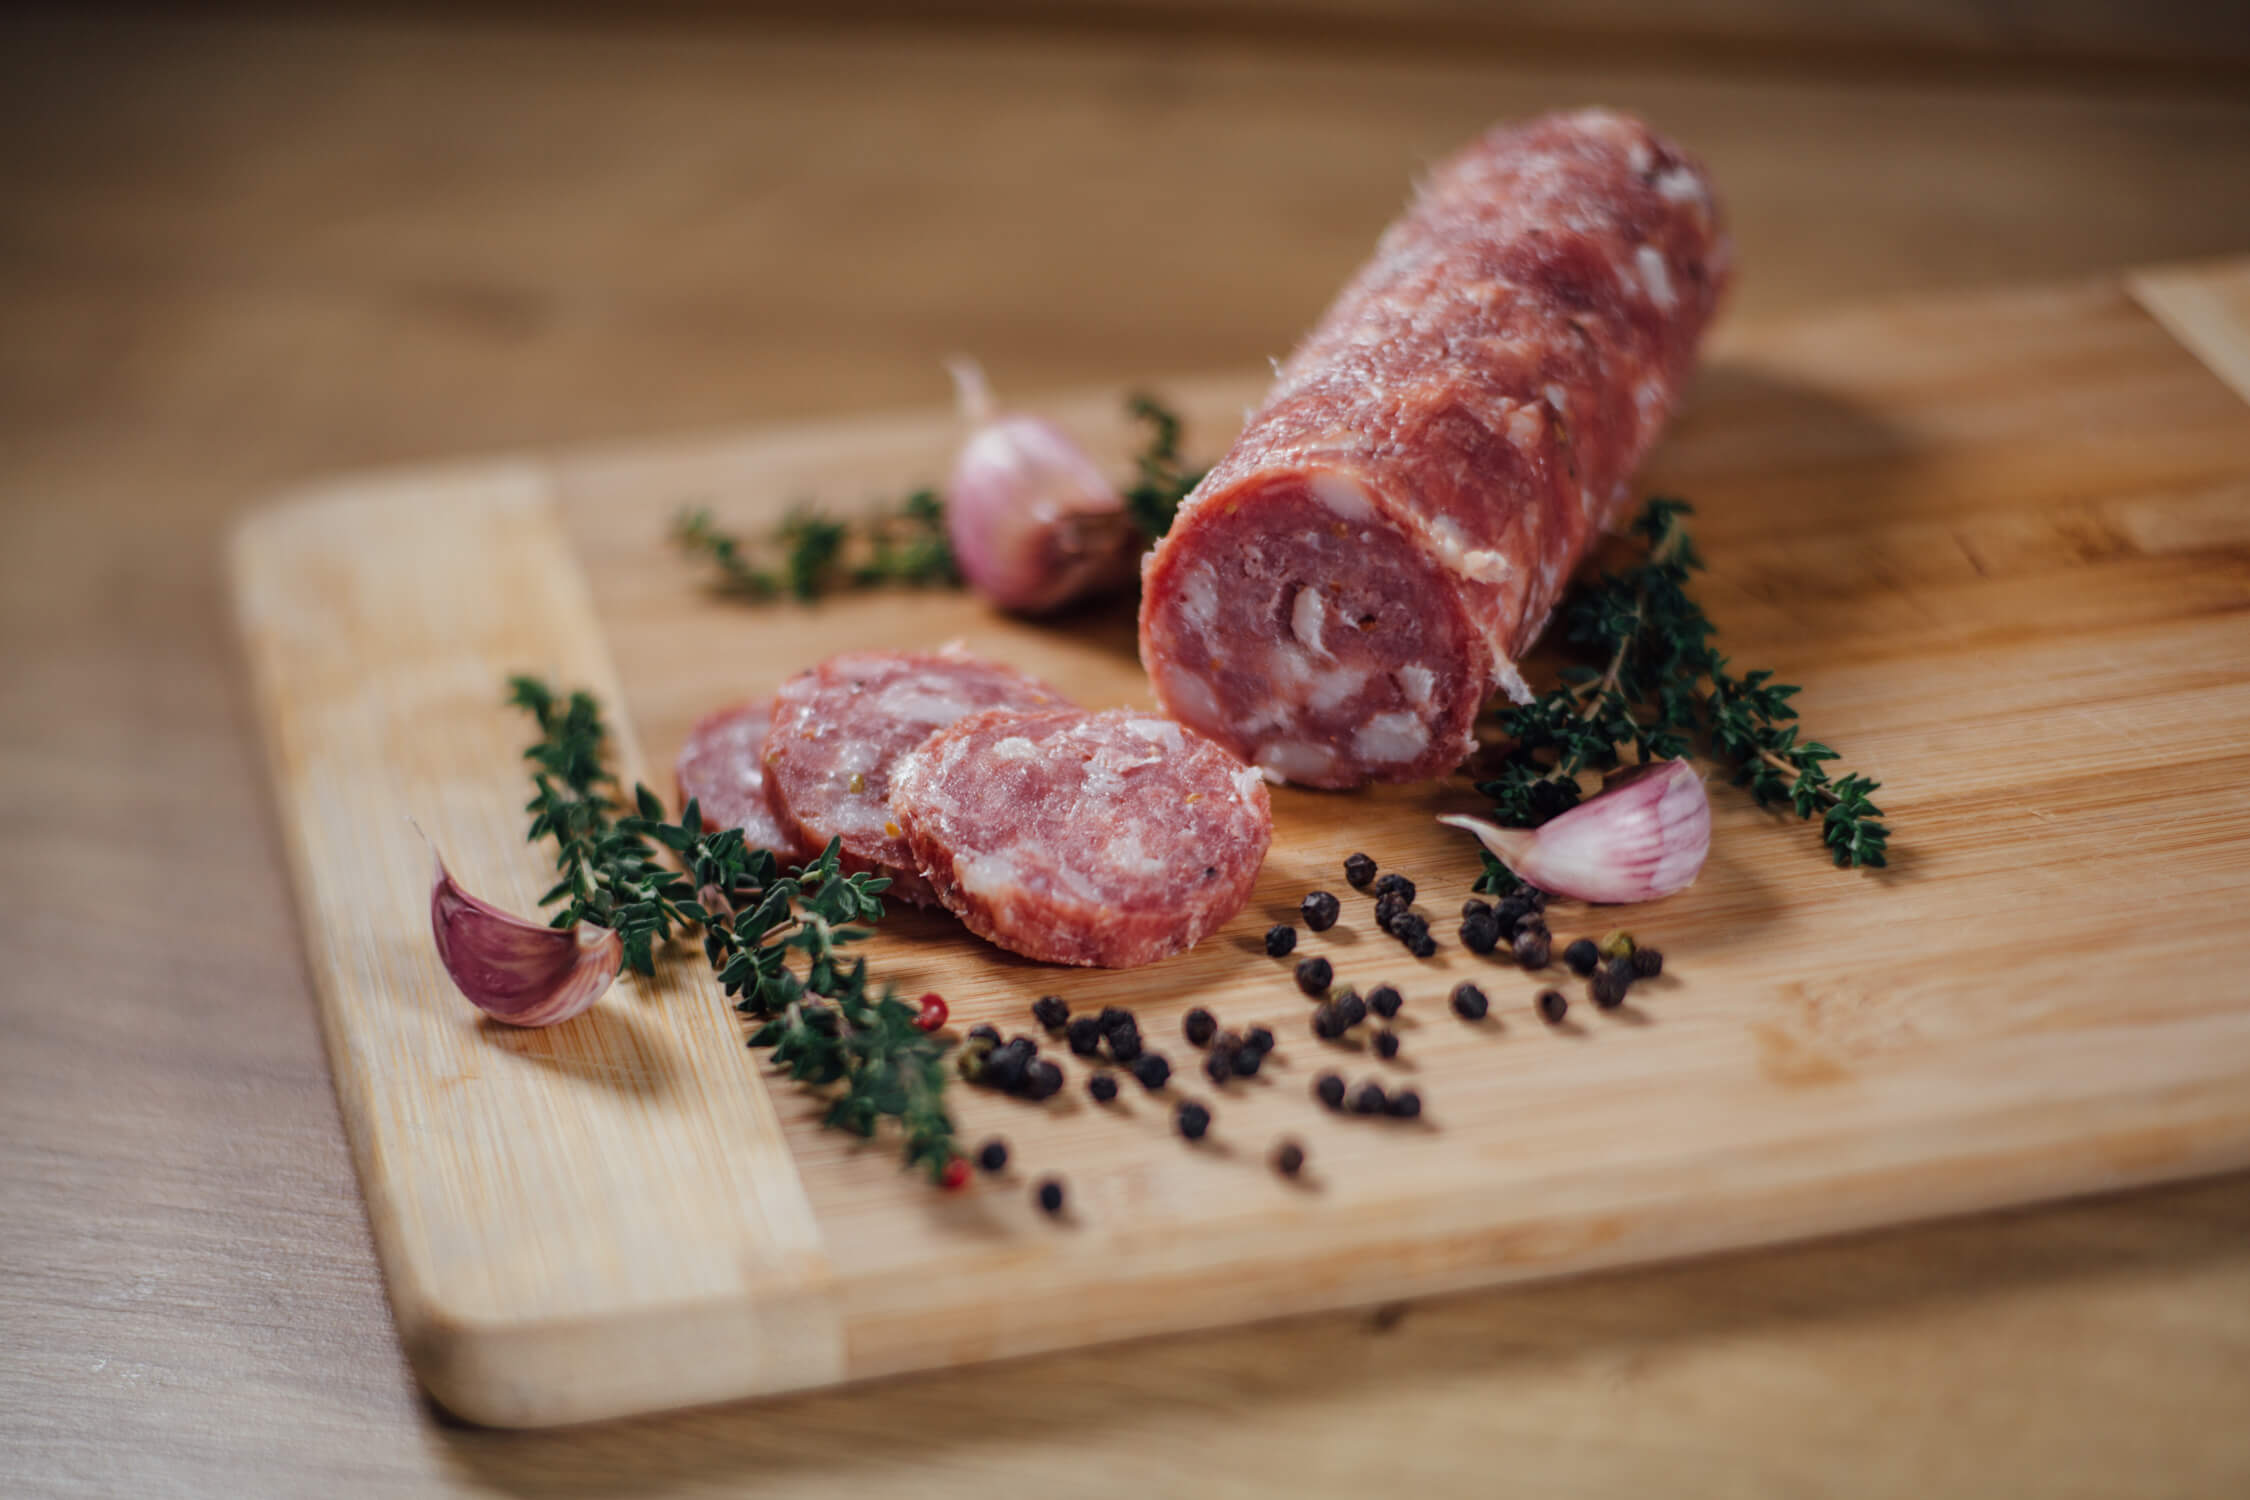 Salami 101: Your Questions Answered